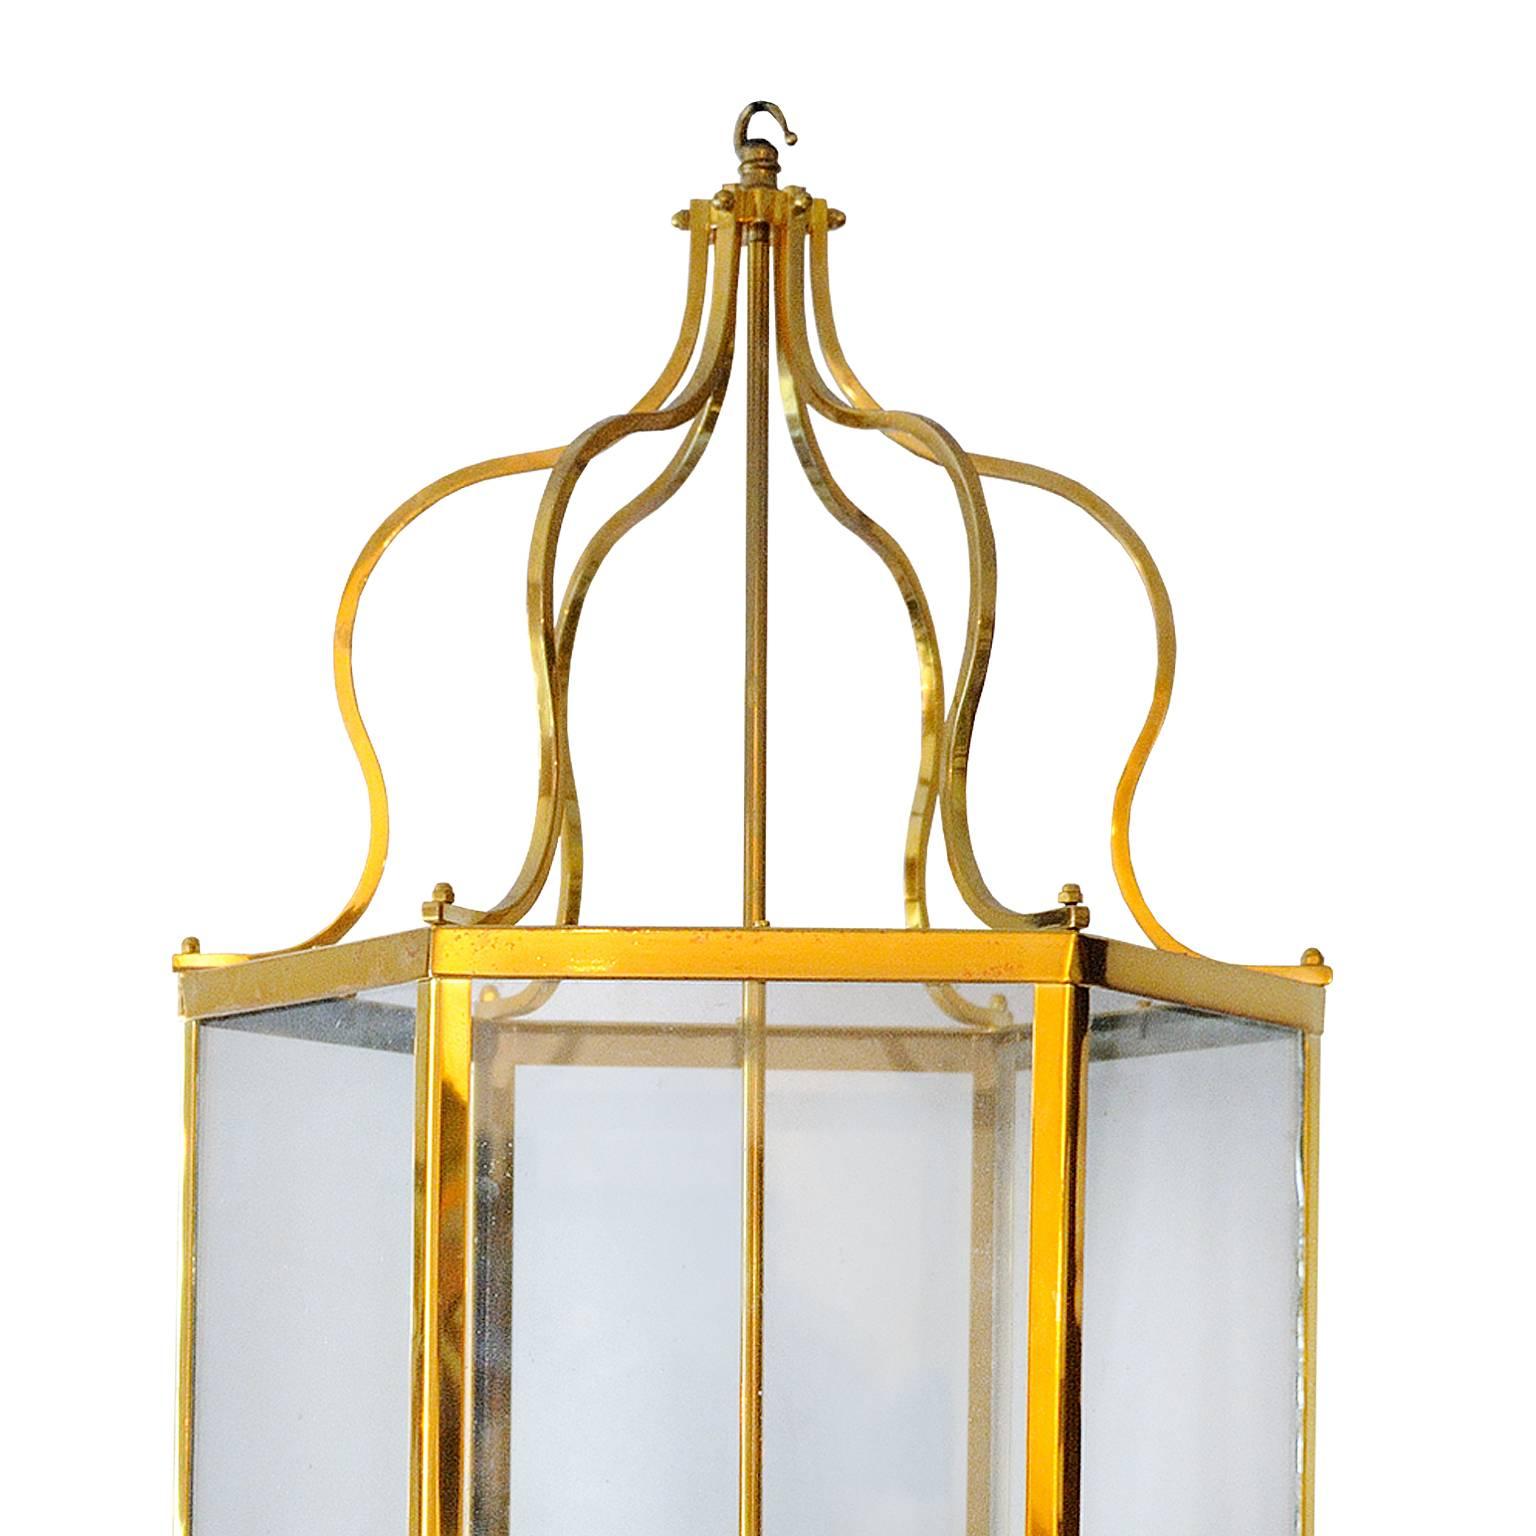 This is a rather beautiful and stylish large 18th century Georgian style brass frame lantern, circa 1920.